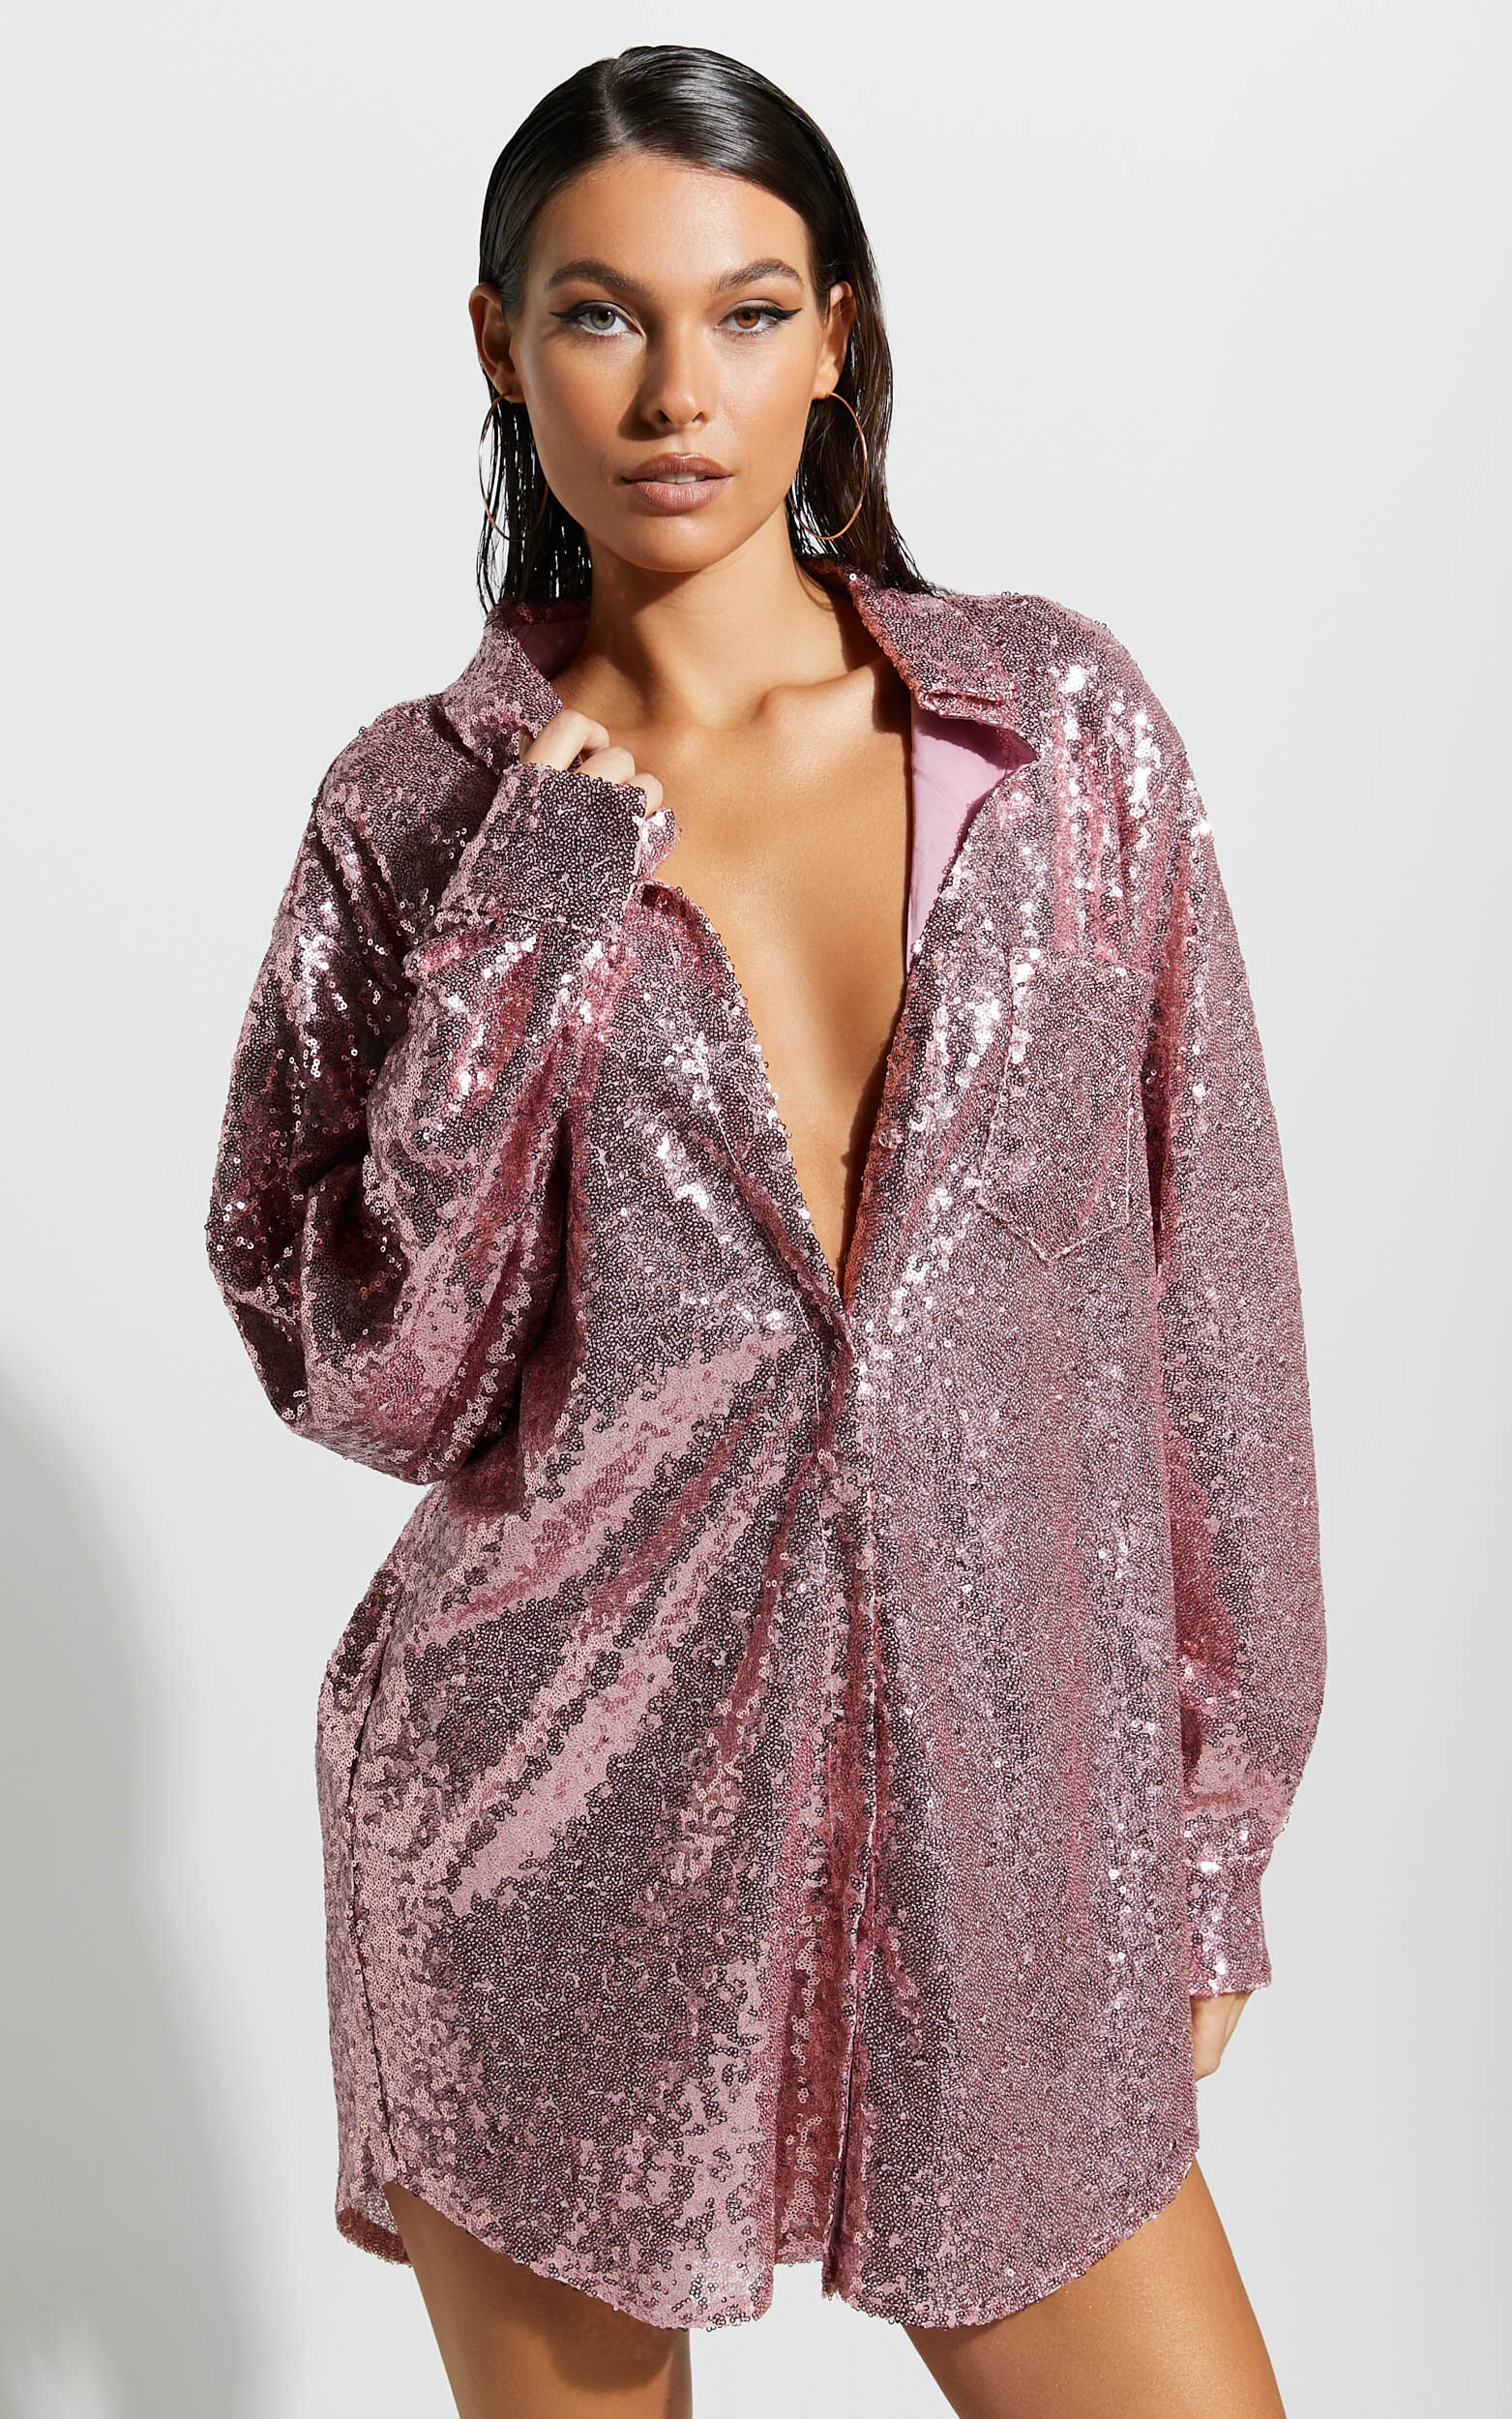 Cally Mini Dress - Oversized Shirt Dress in Lilac Sequin - 14, PRP1